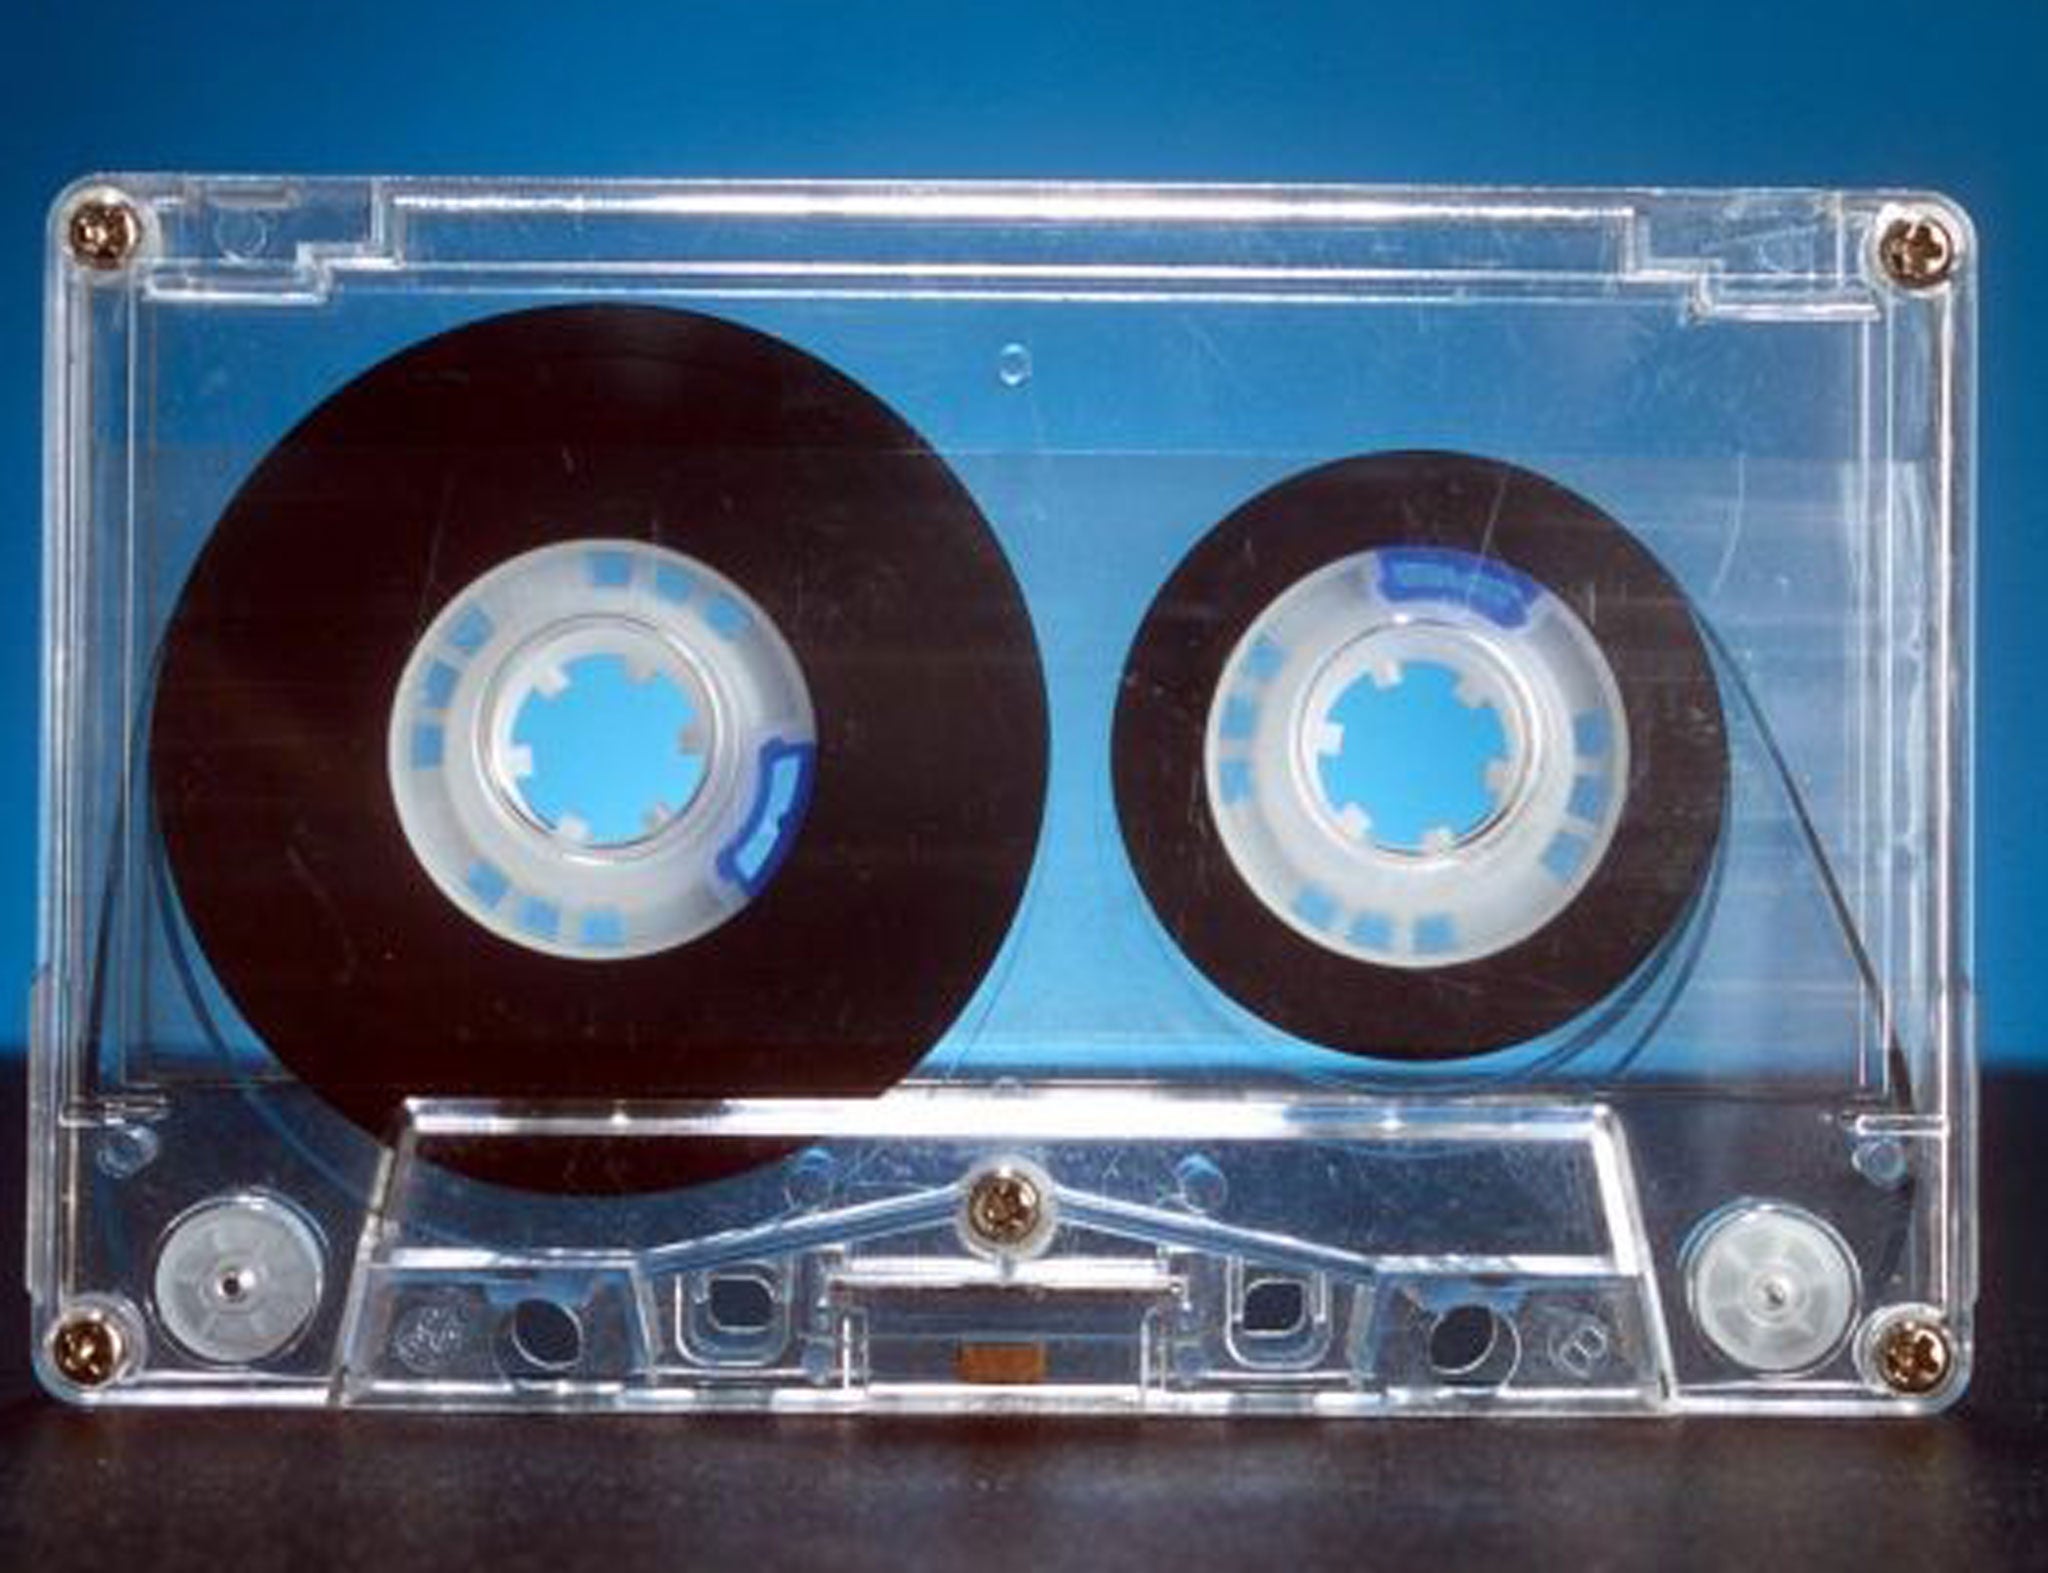 Just as the
last memories of jammed Walkmans fade away, labels are again releasing on cassette